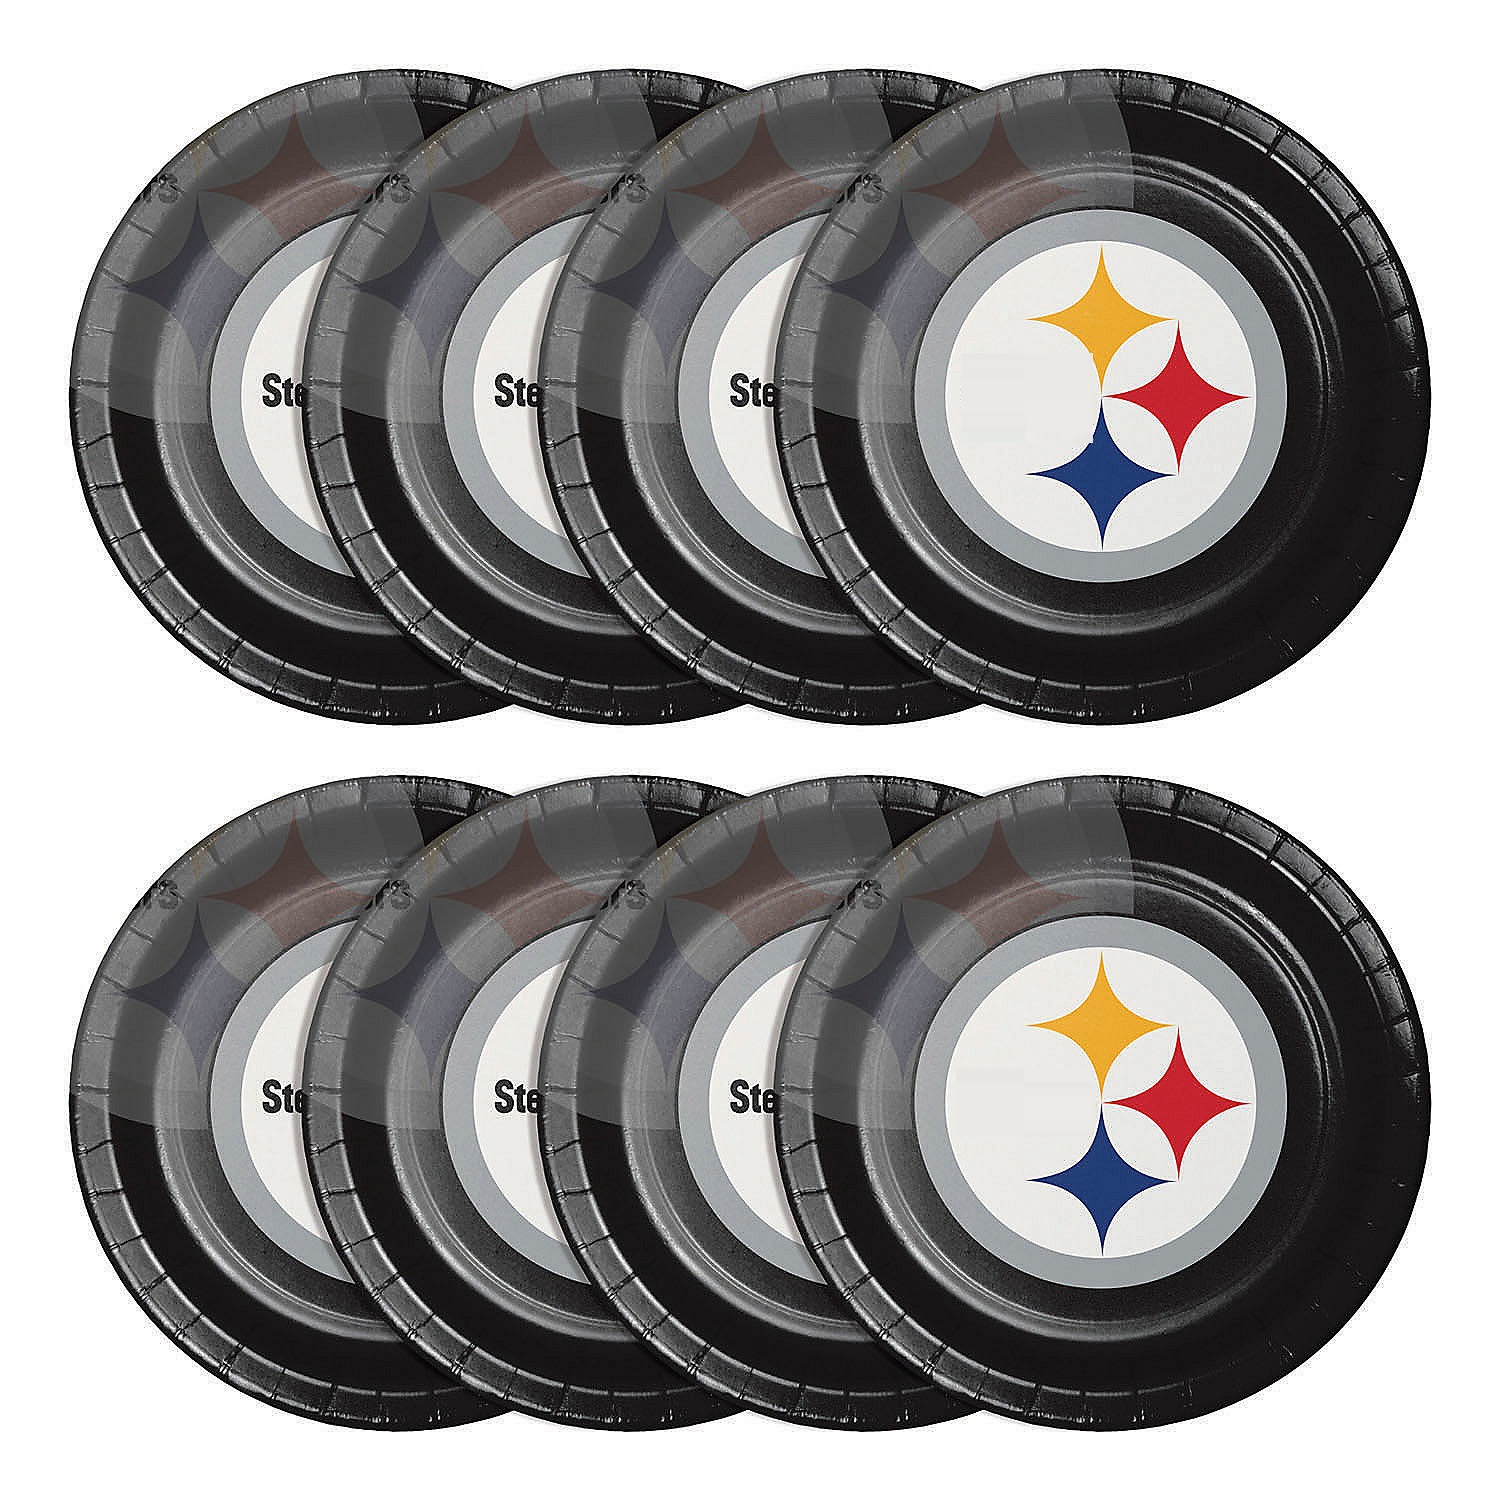 nfl-pittsburgh-steelers-paper-plate-and-napkin-party-kit_14115192-a01